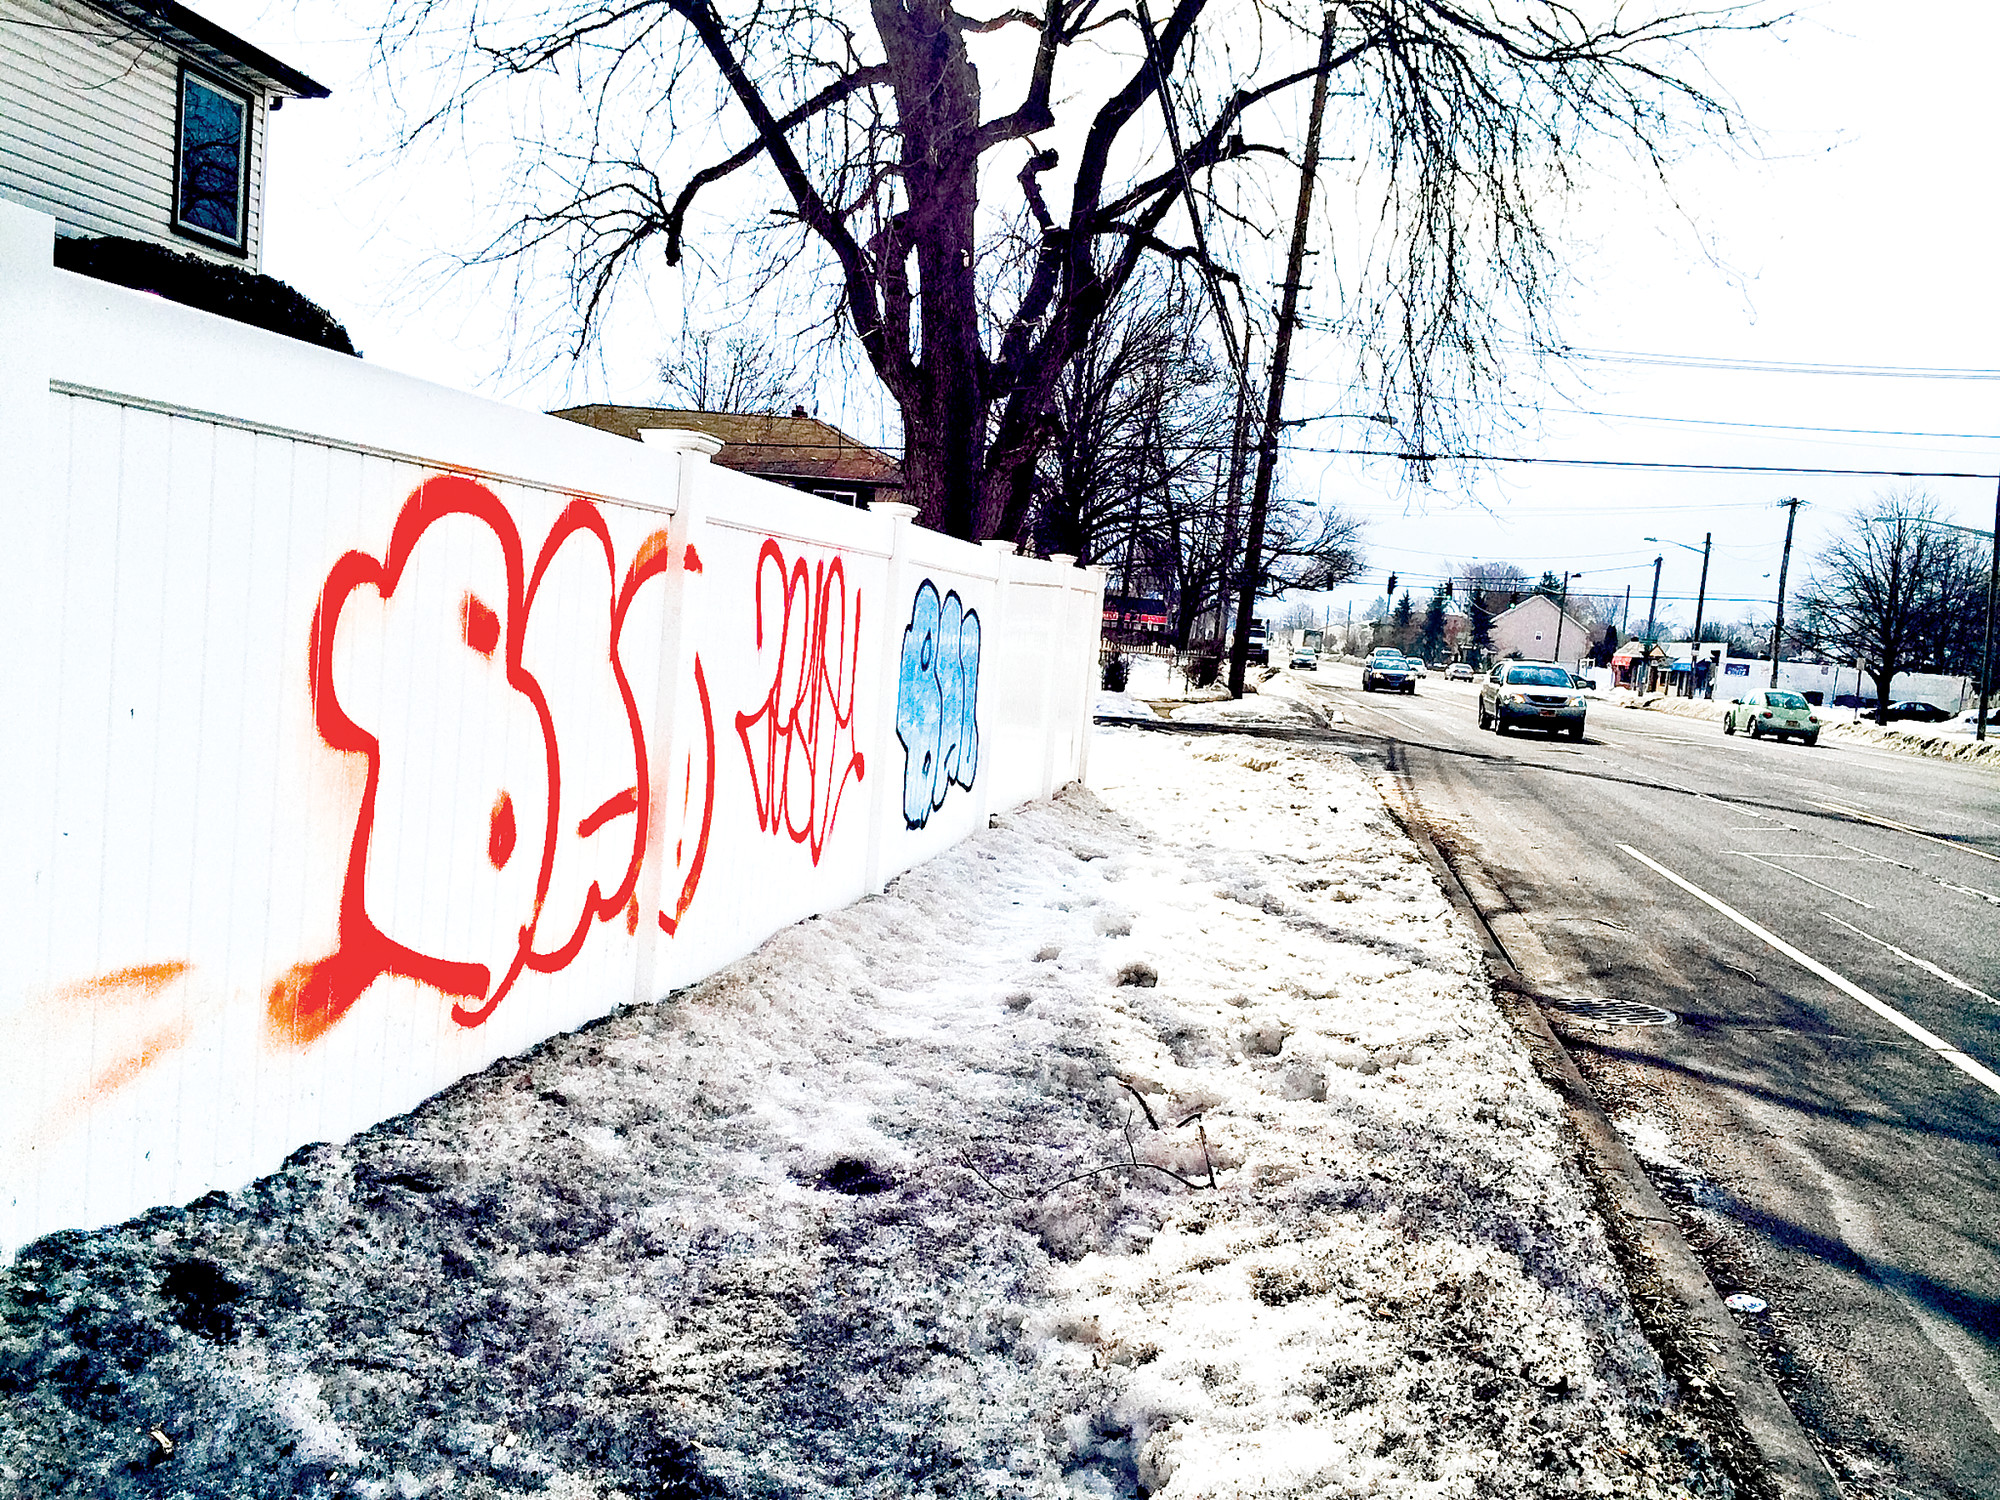 The increasing frequency of graffiti in East Meadow in recent months — here on a residential fence on Newbridge Road — has been a major complaint among residents.